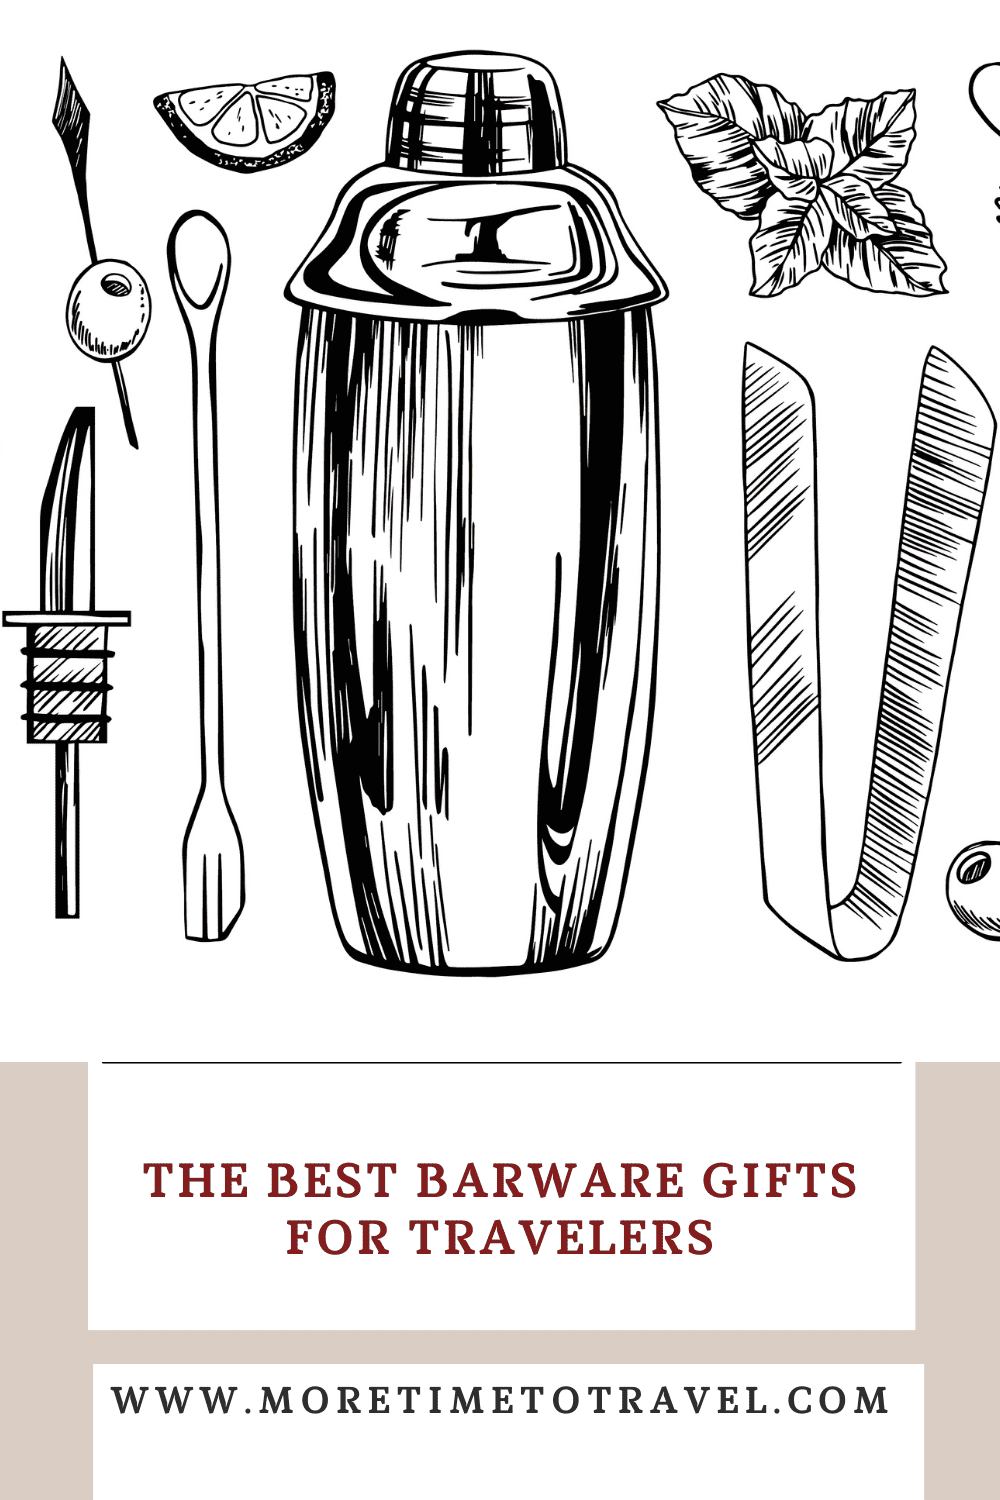 Best Barware Gifts for Travelers pin